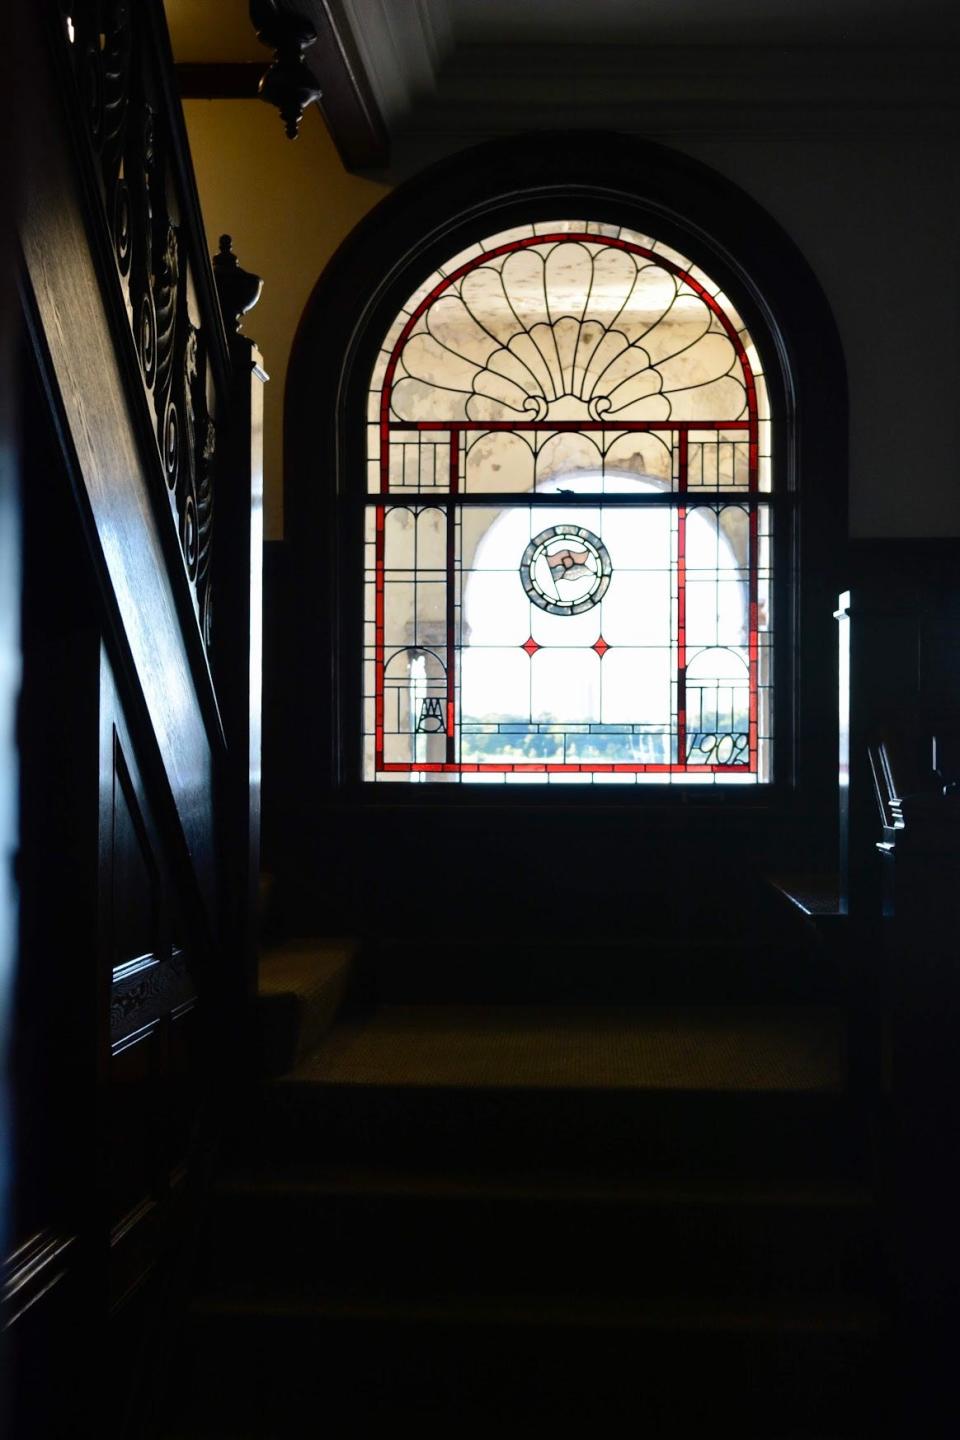 The stained glass window, pictured in July 2021, is located at the landing of the boathouse’s main staircase, features the club’s flag, year of construction and the interlocking initials of its architect, Alpheus Williams Chittenden. The window was restored by Sevonty Restoration in two phases.